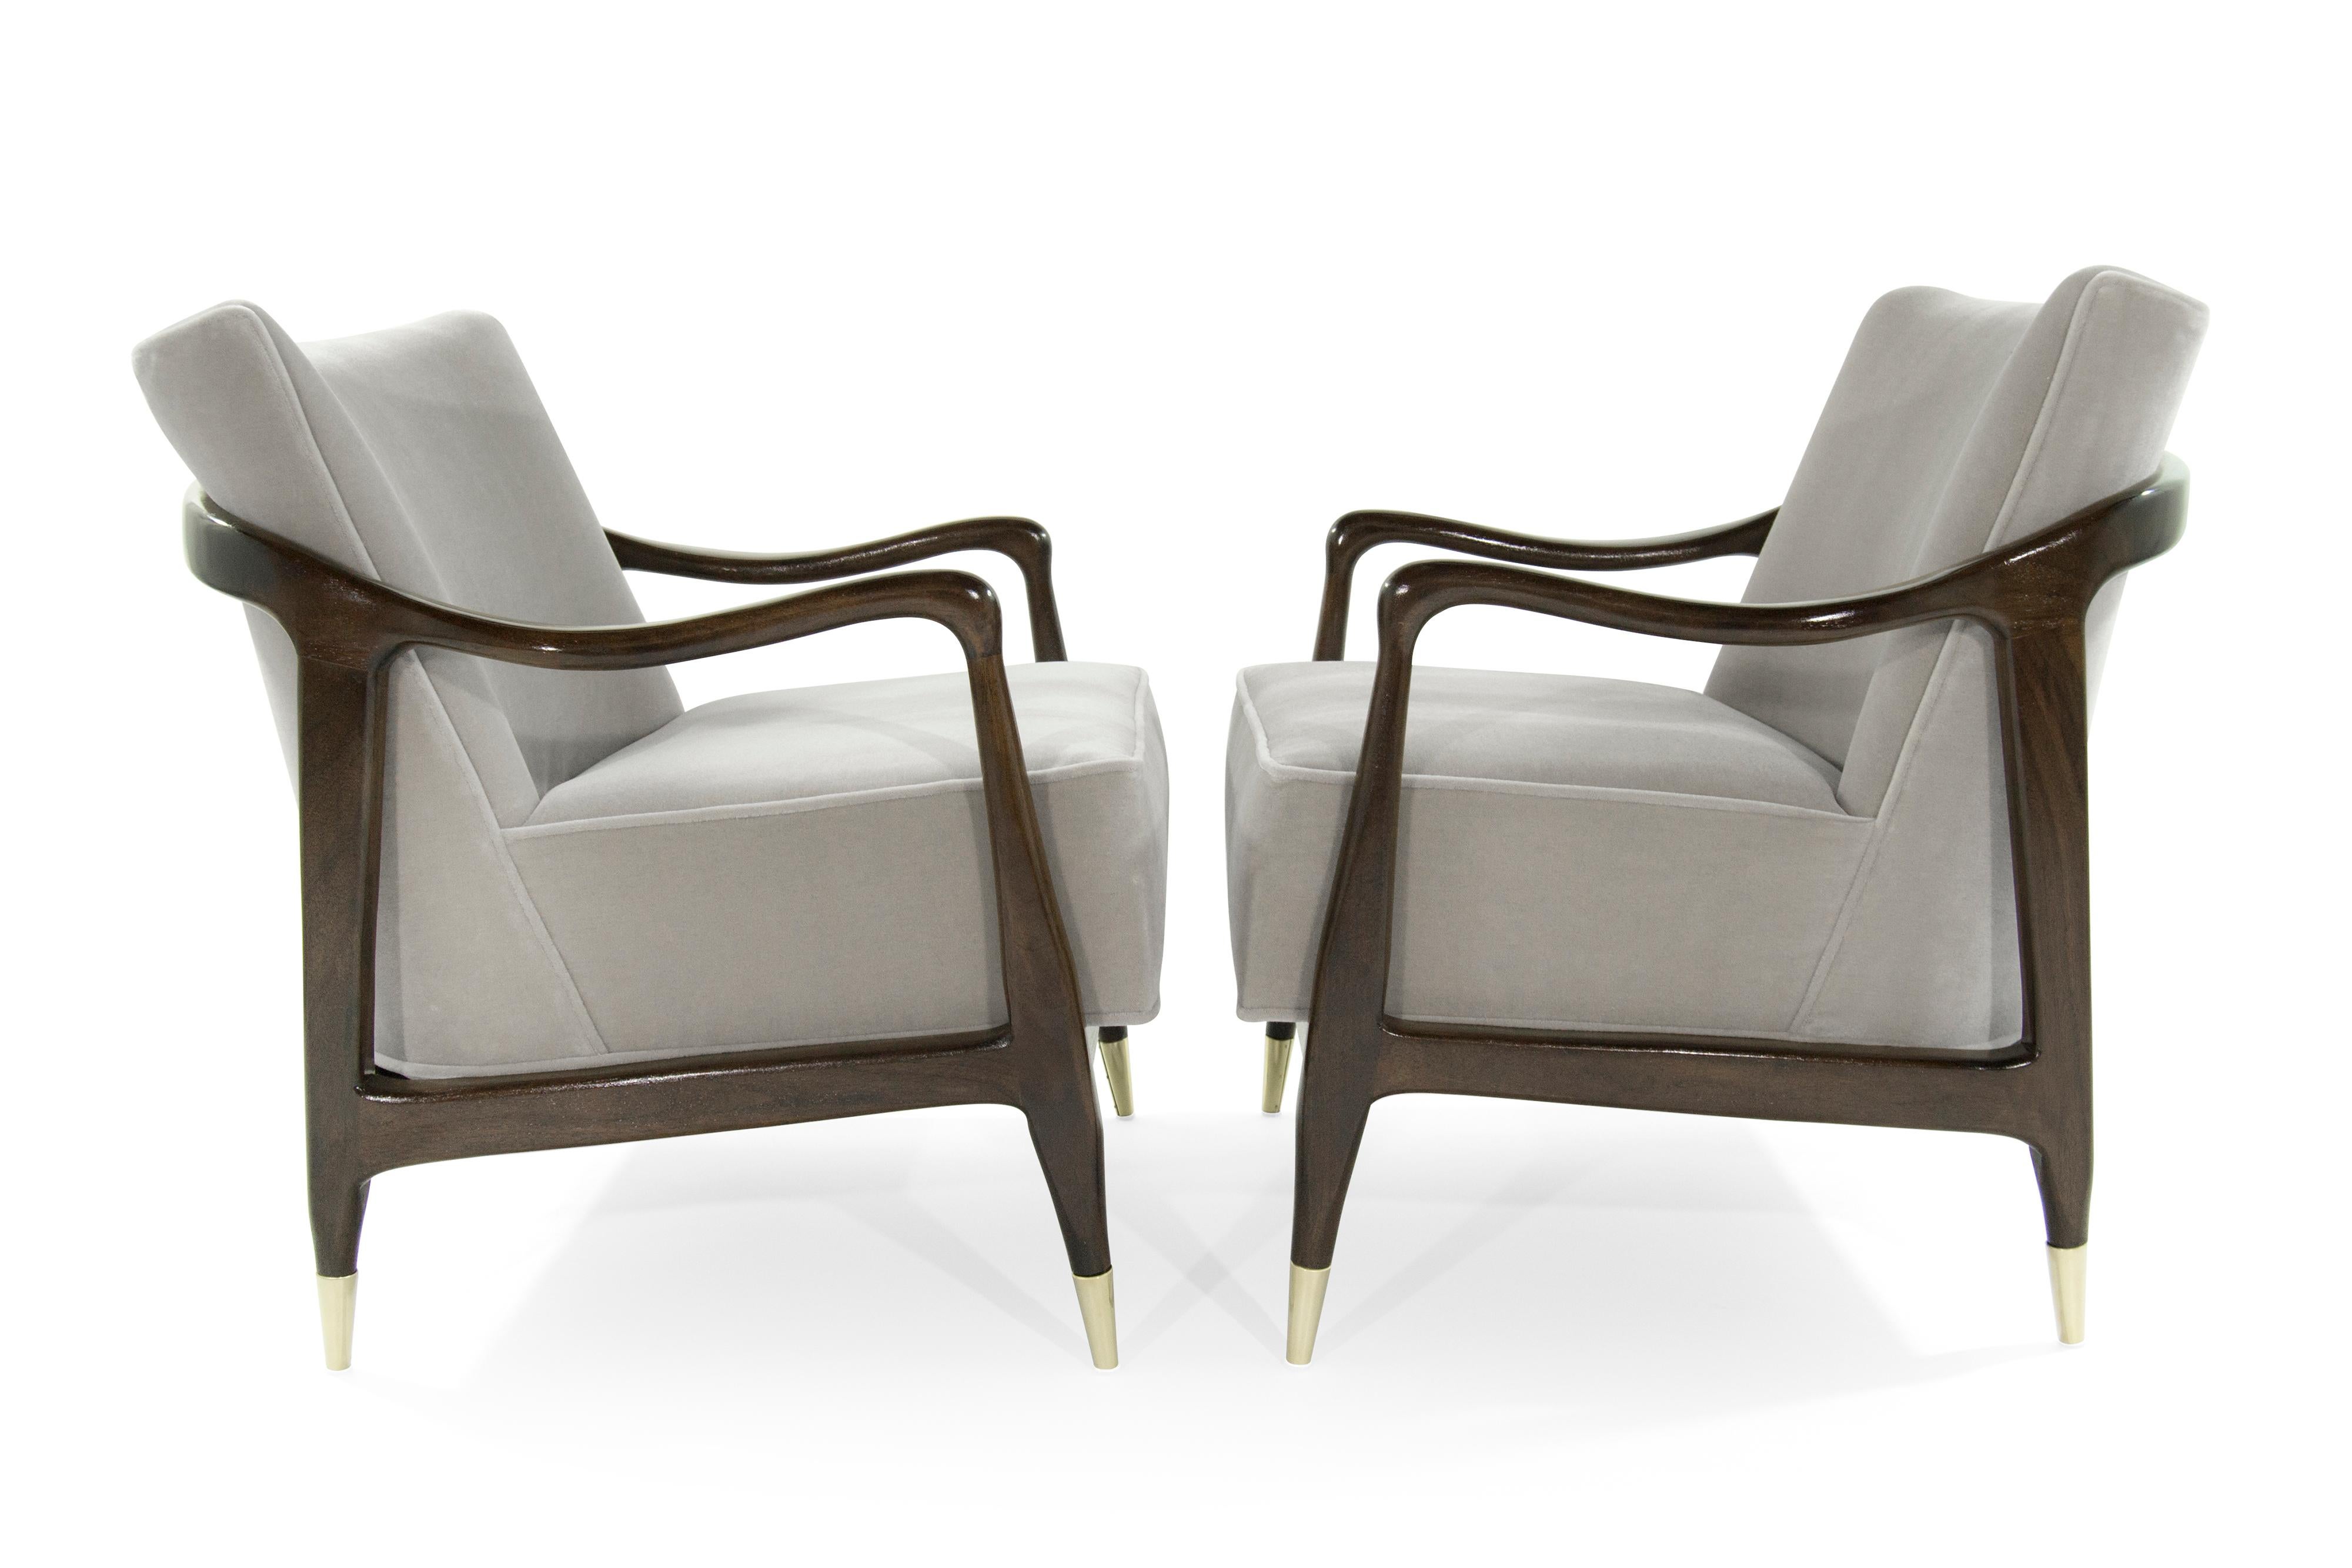 Exquisite pair of Mid-Century Modern lounge chairs featuring sculptural walnut frames, which have been expertly restored to their original integrity. They boast handcut high grade foam, as well as hand polished brass sabots.
They have been